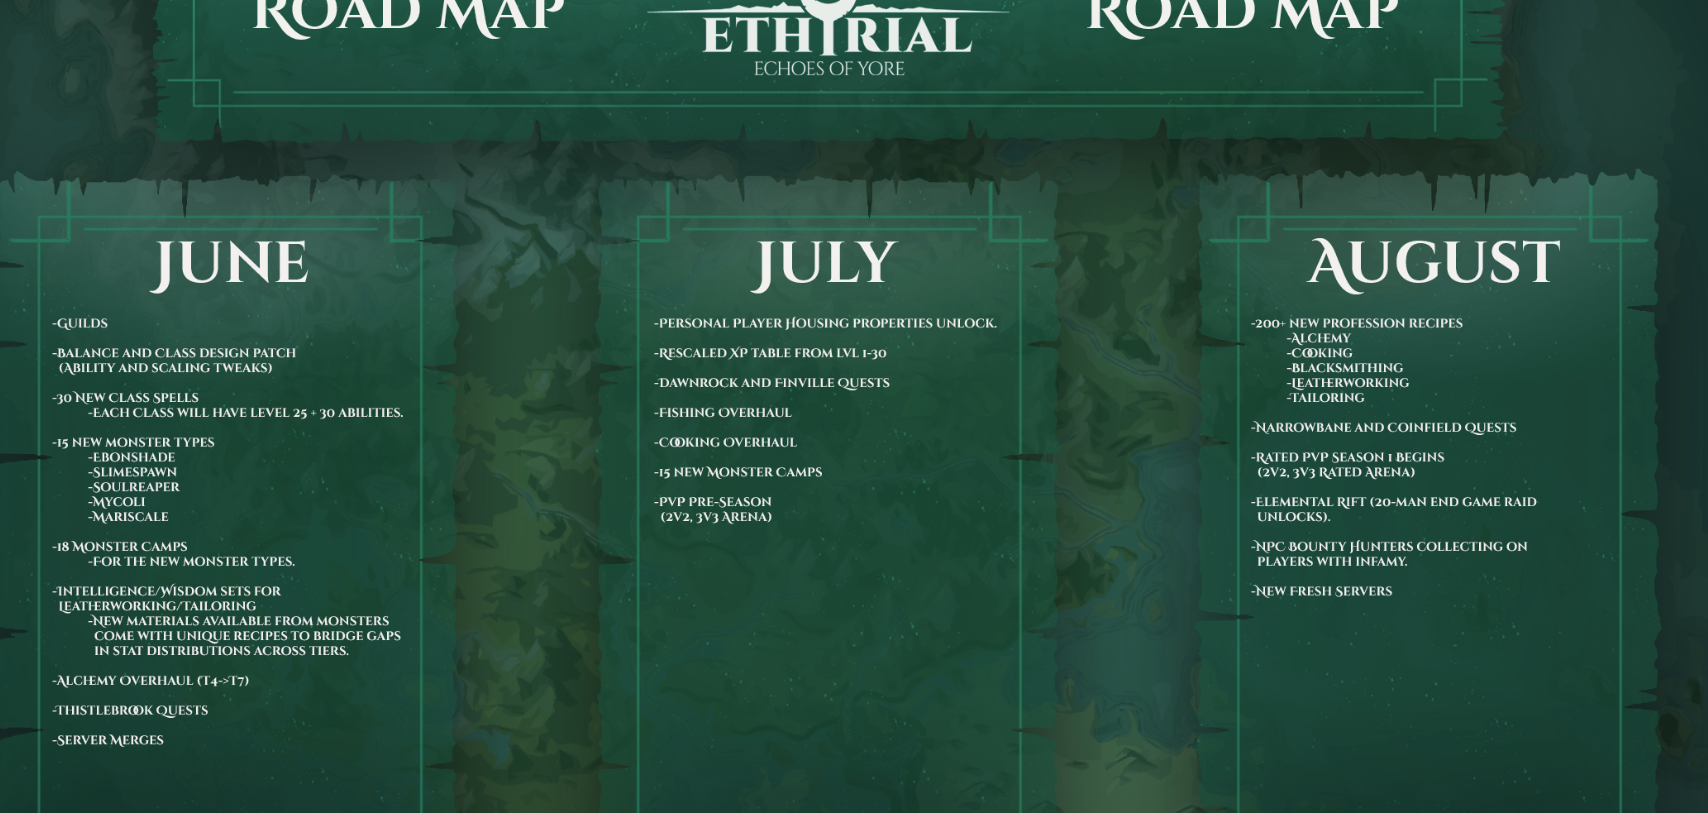 Ethyrial: Echoes of Yore Announces Server Merges and Revamped Roadmap